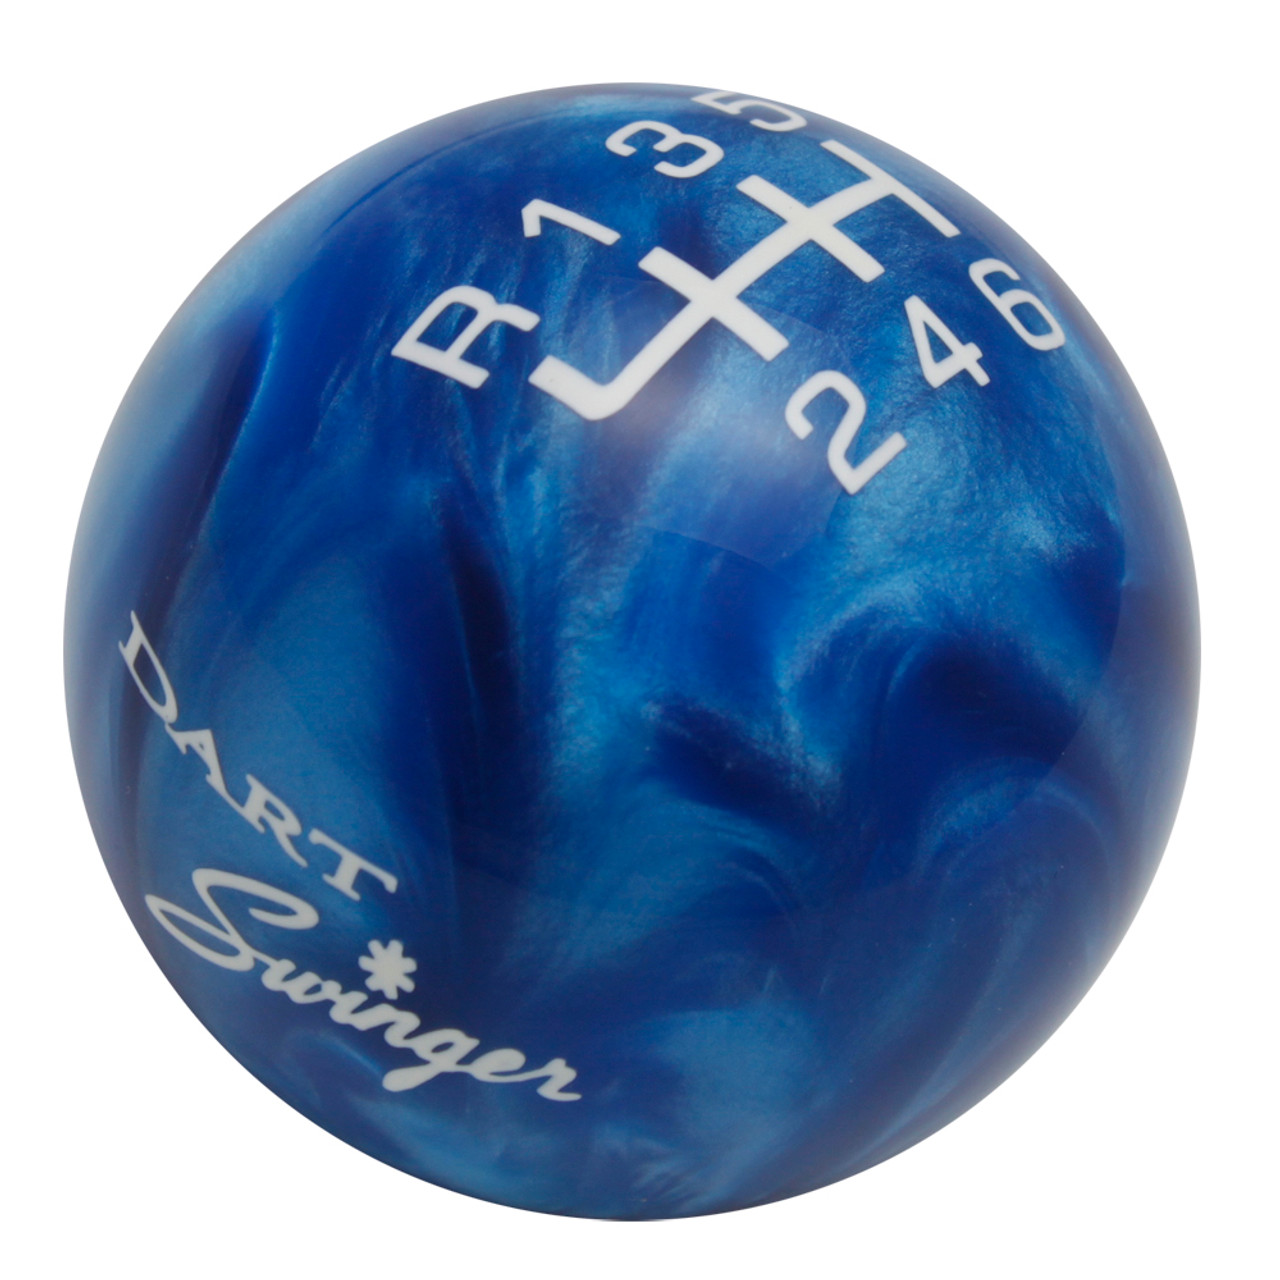 Blue Pearl knob with White graphics